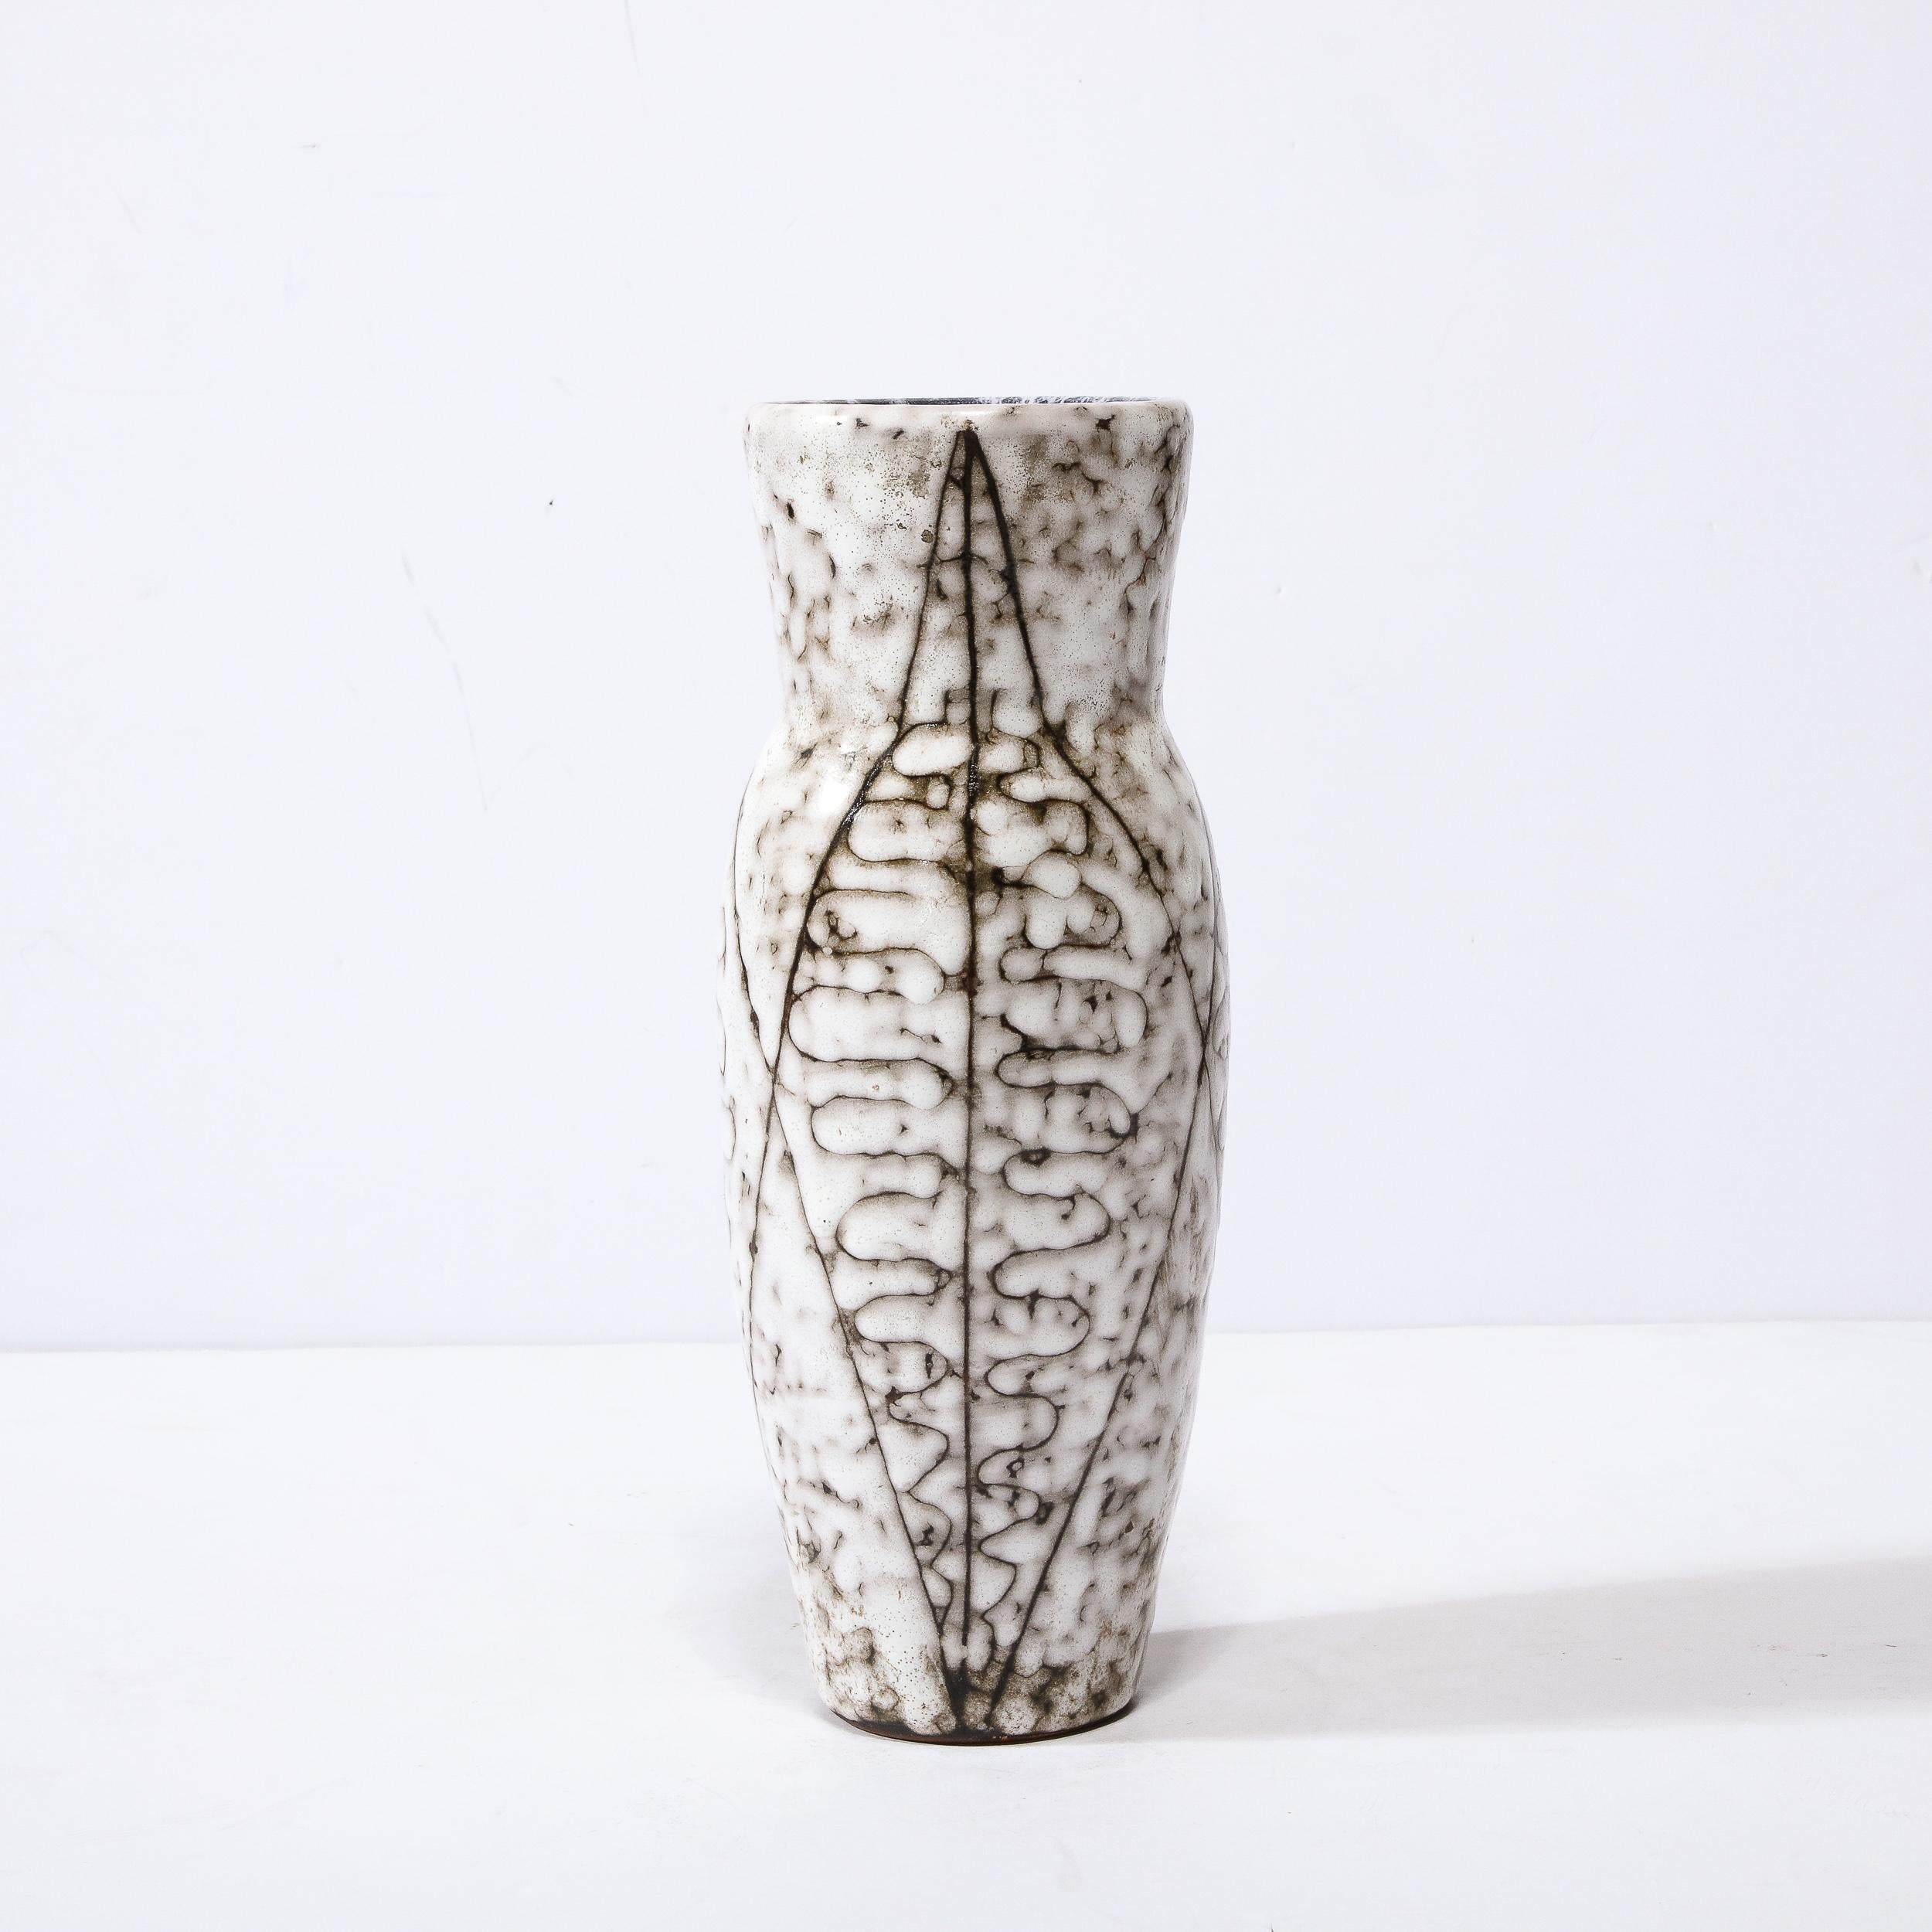 Hungarian Mid-Century Modernist White and Earth Toned Ceramic Vase with Leaf Motif For Sale